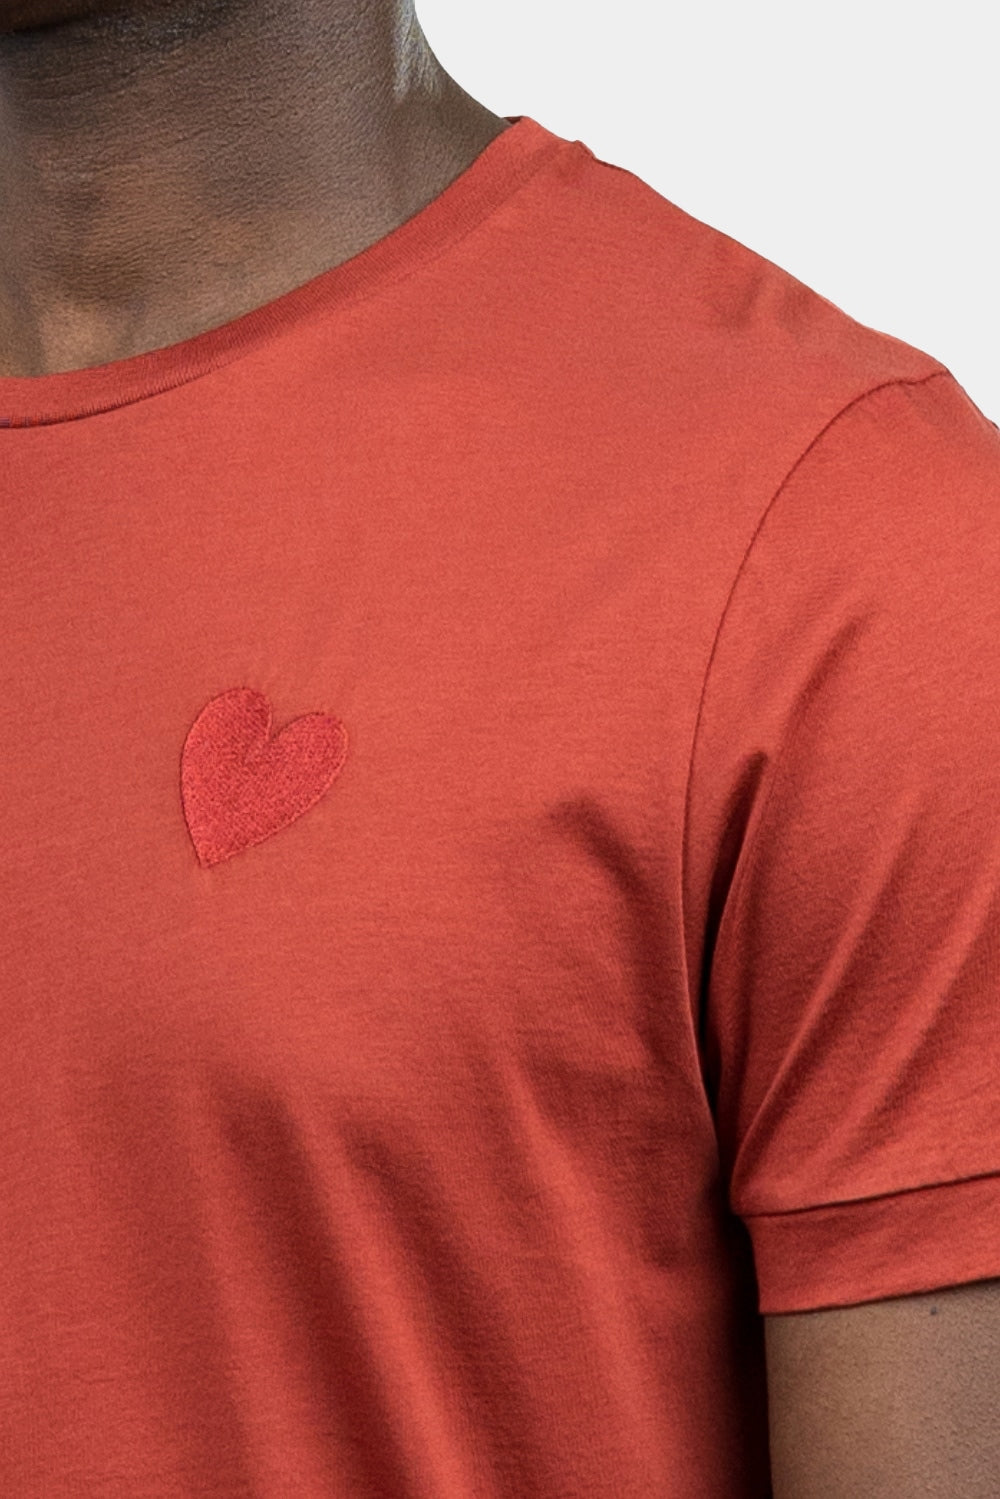 Classic Embroidery Heart Baked Clay T-shirt